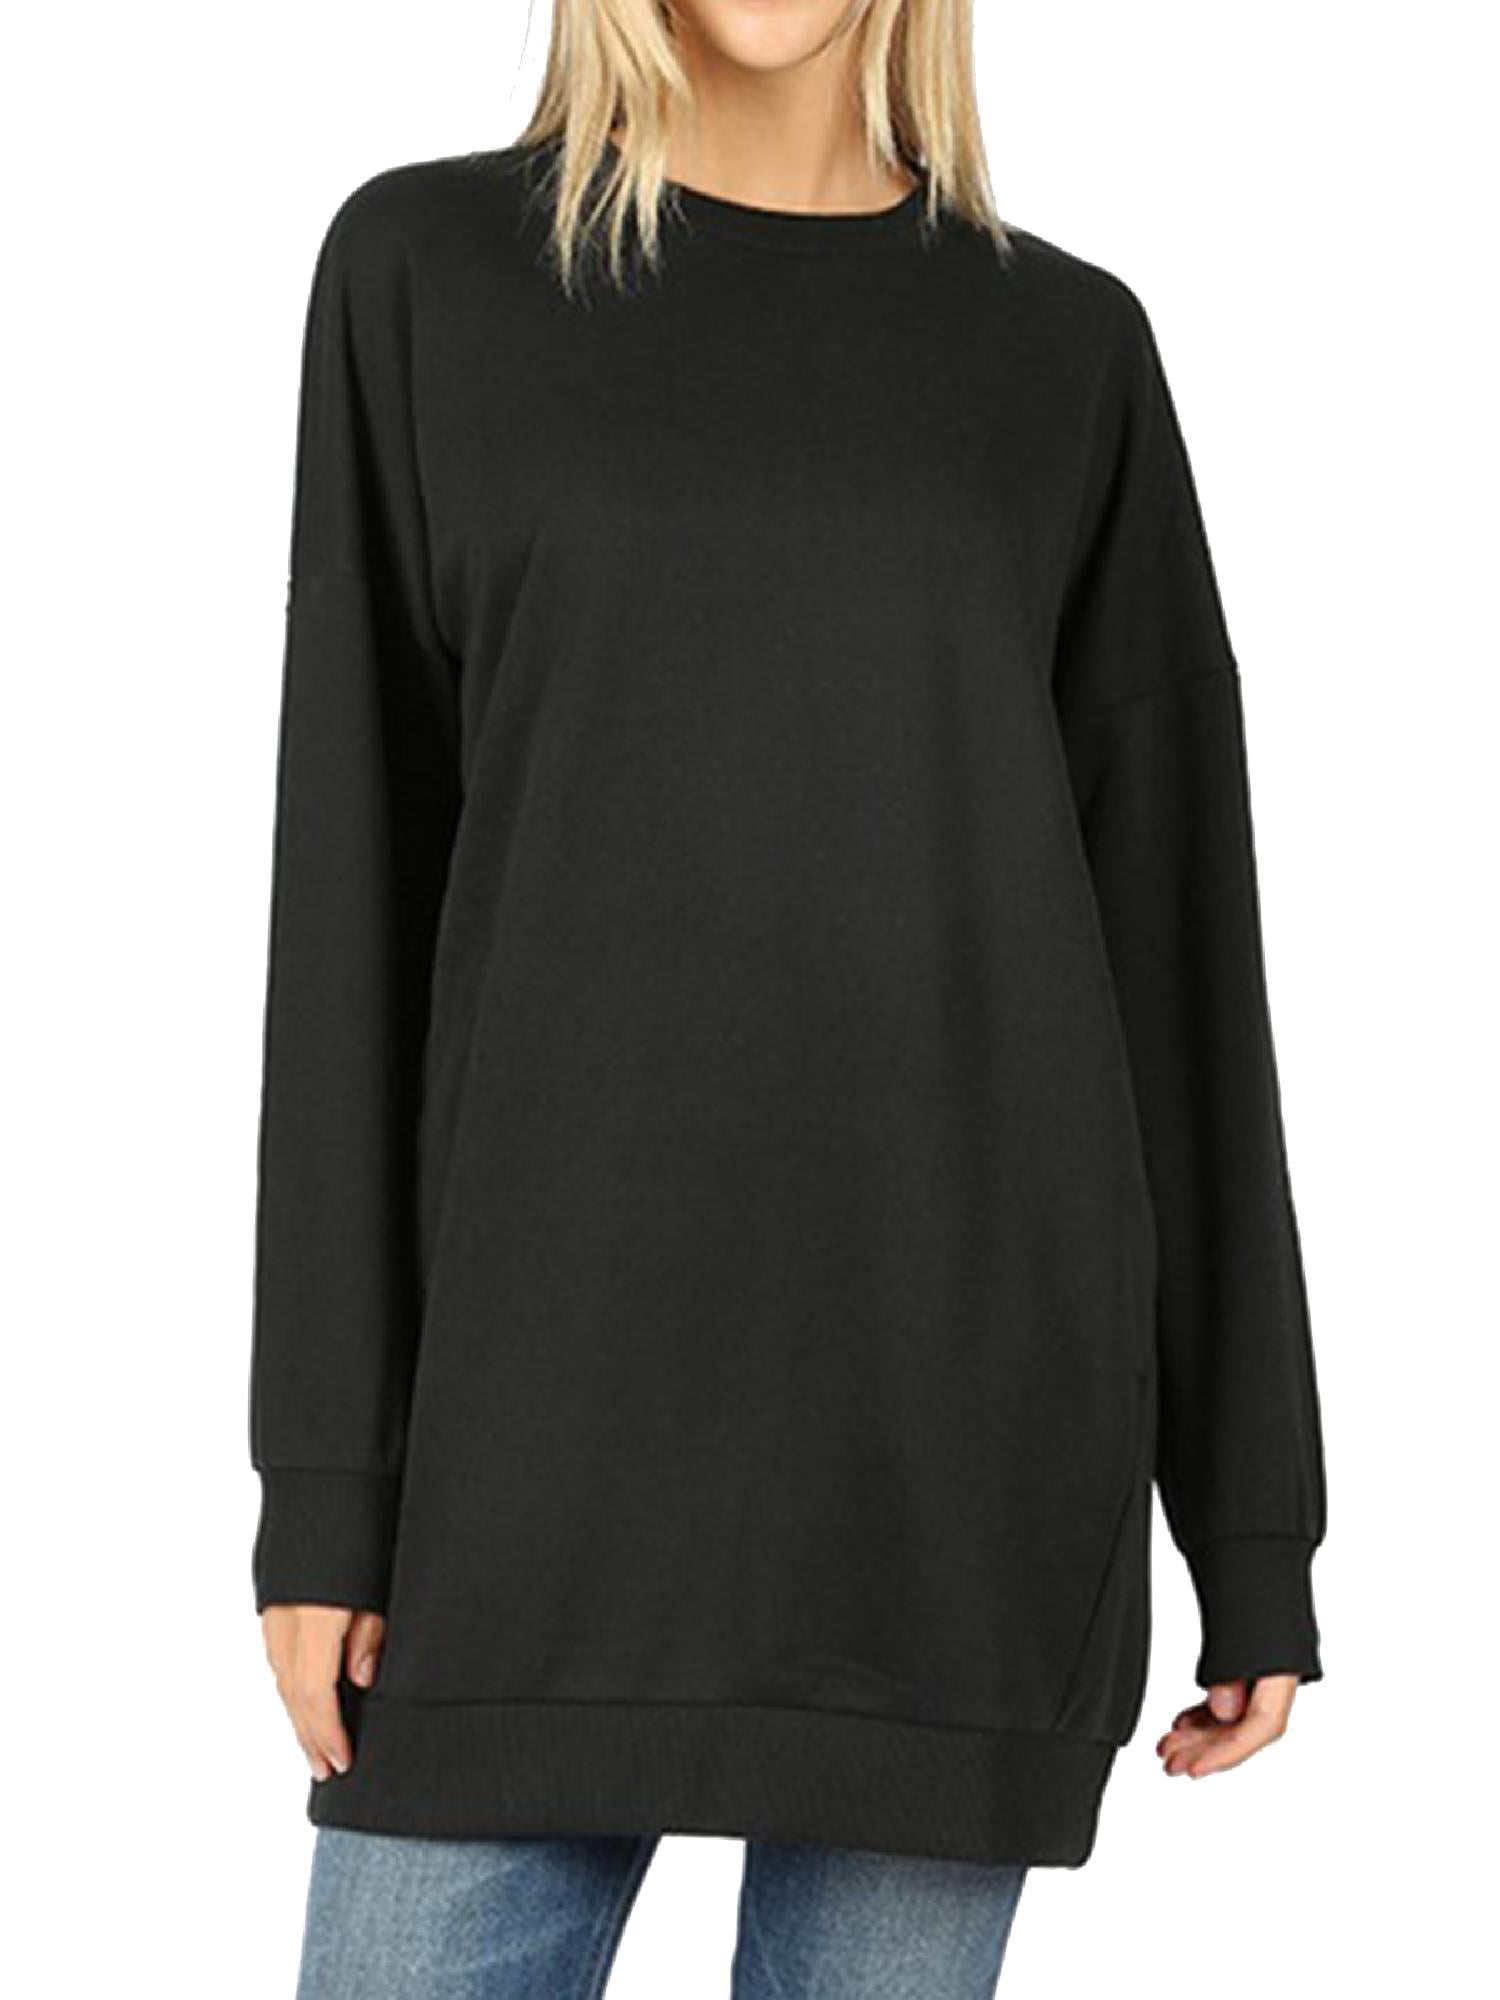 Made by Olivia - Made by Olivia Women's Casual Oversized Crew Neck ...